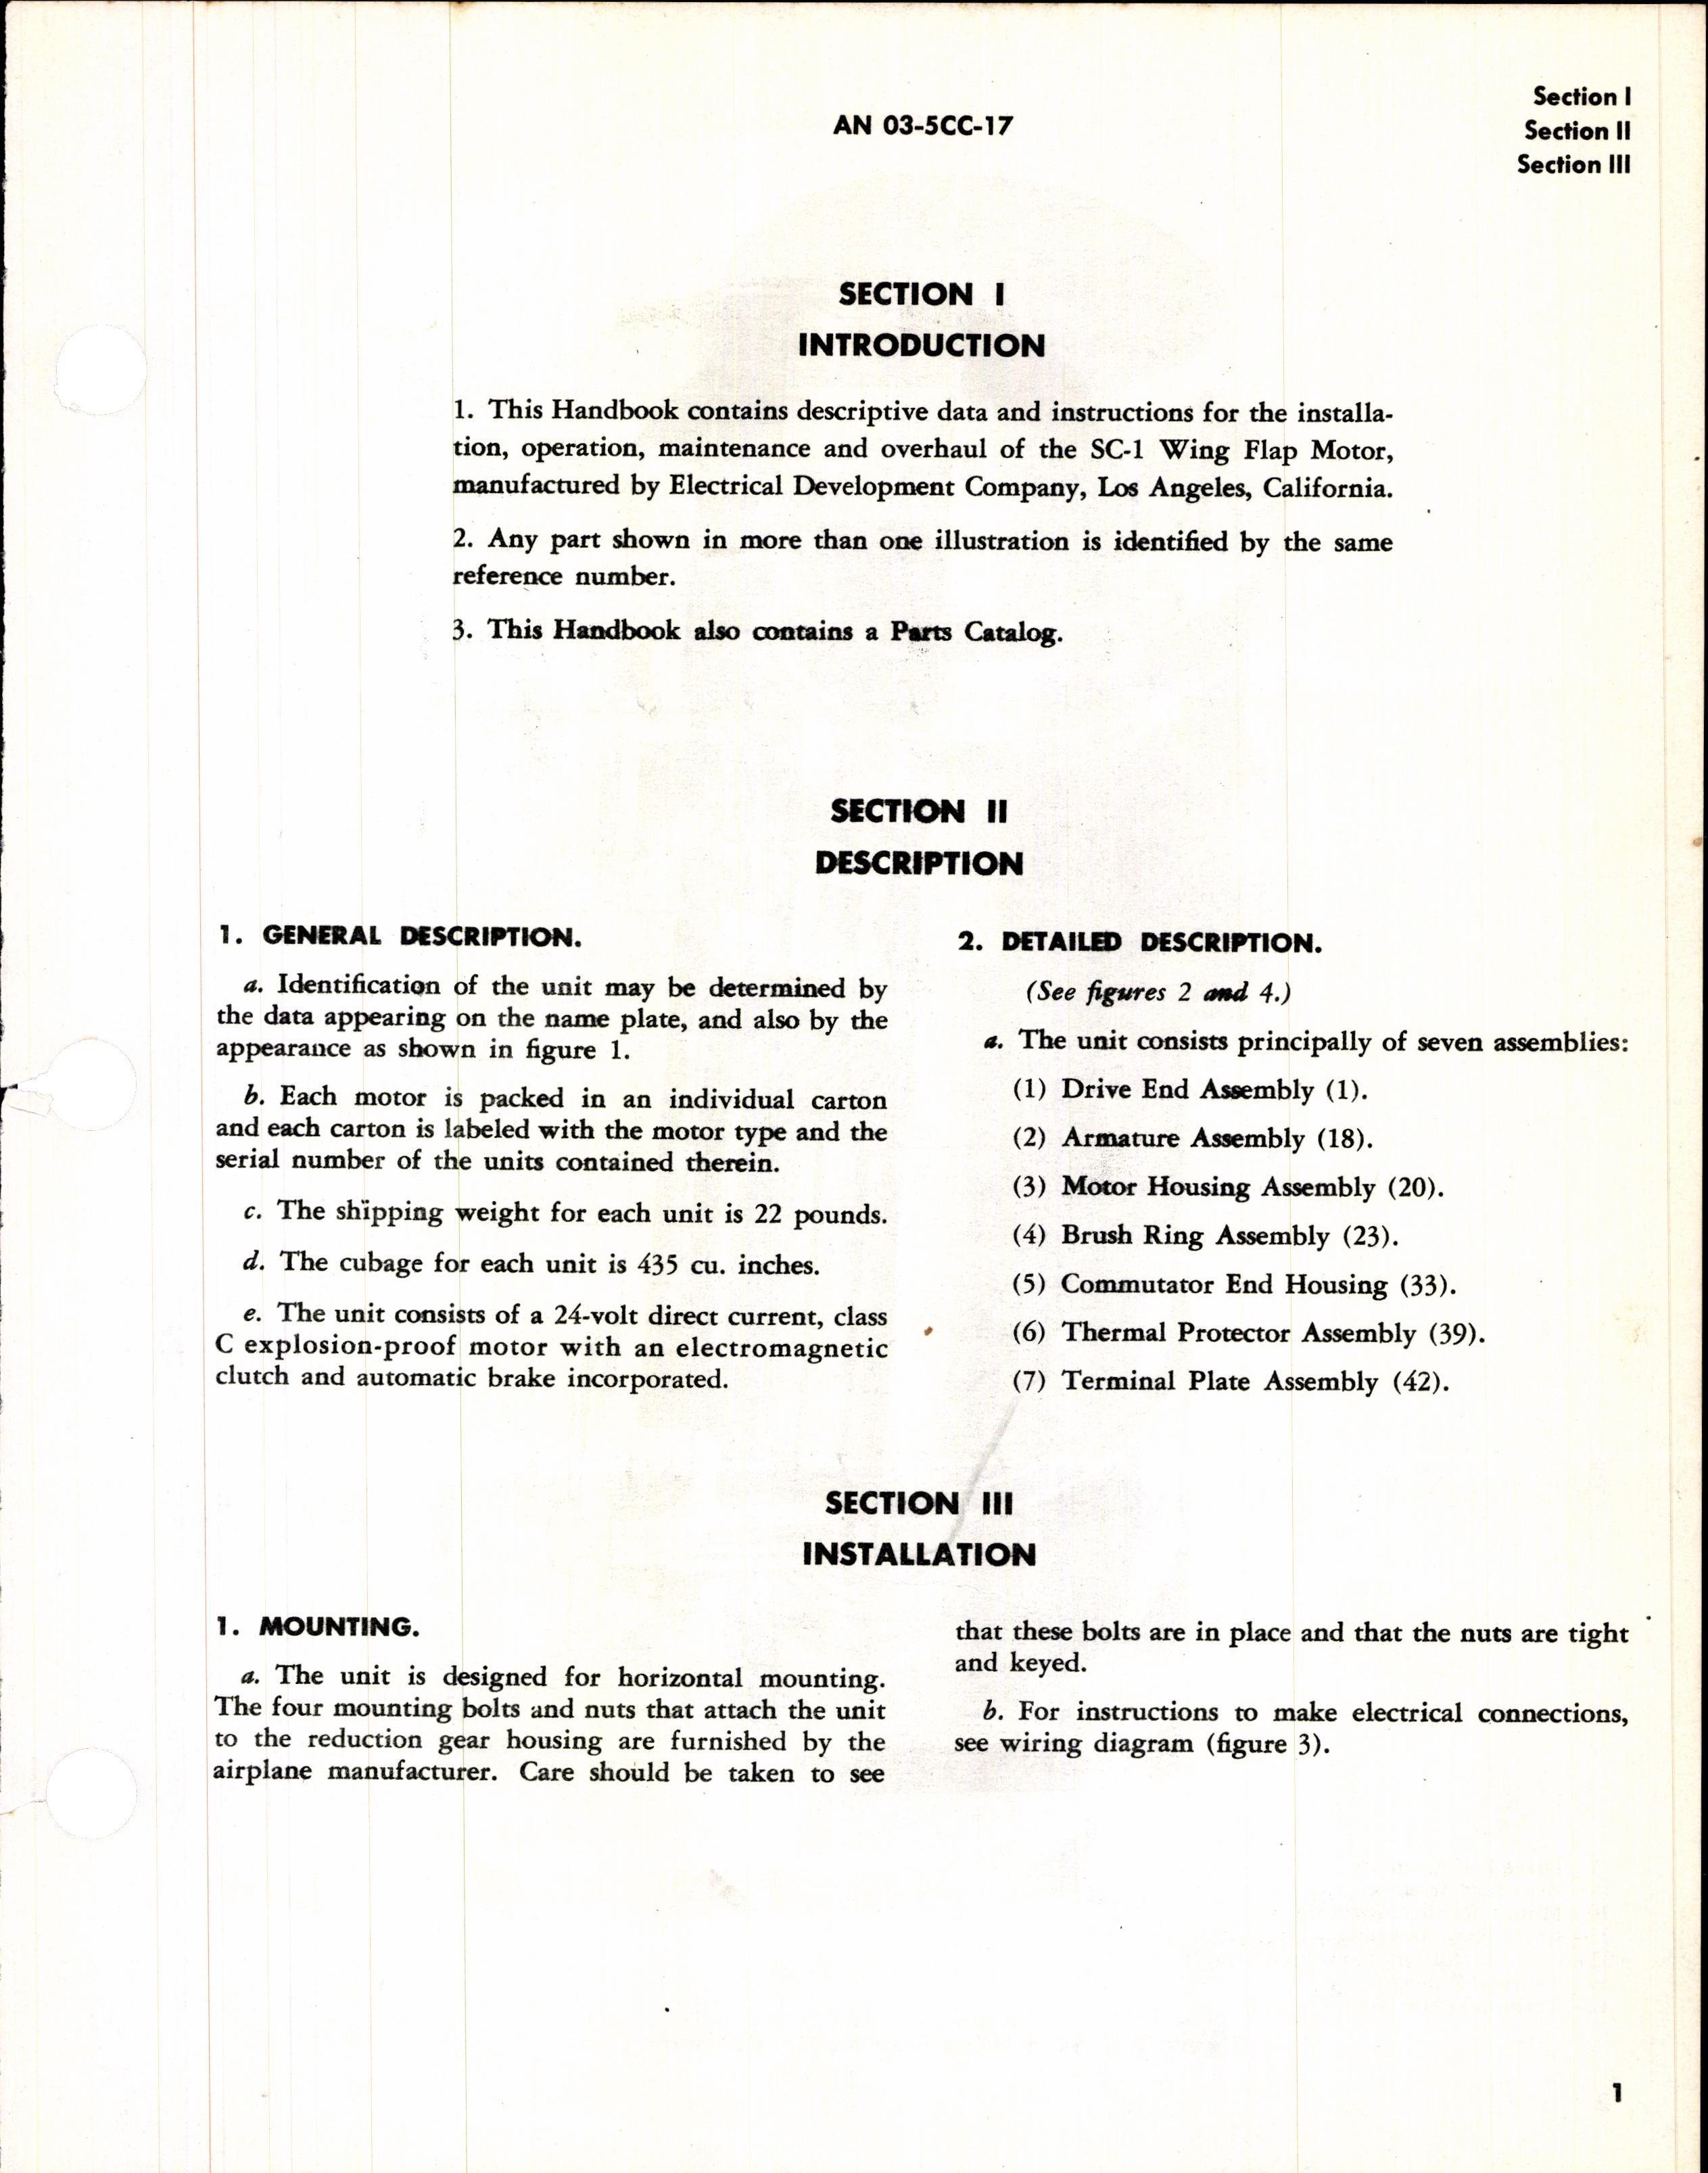 Sample page 5 from AirCorps Library document: Operation, Service, & Overhaul Instructions with Parts Catalog for SC-1 Wing Flap Motor